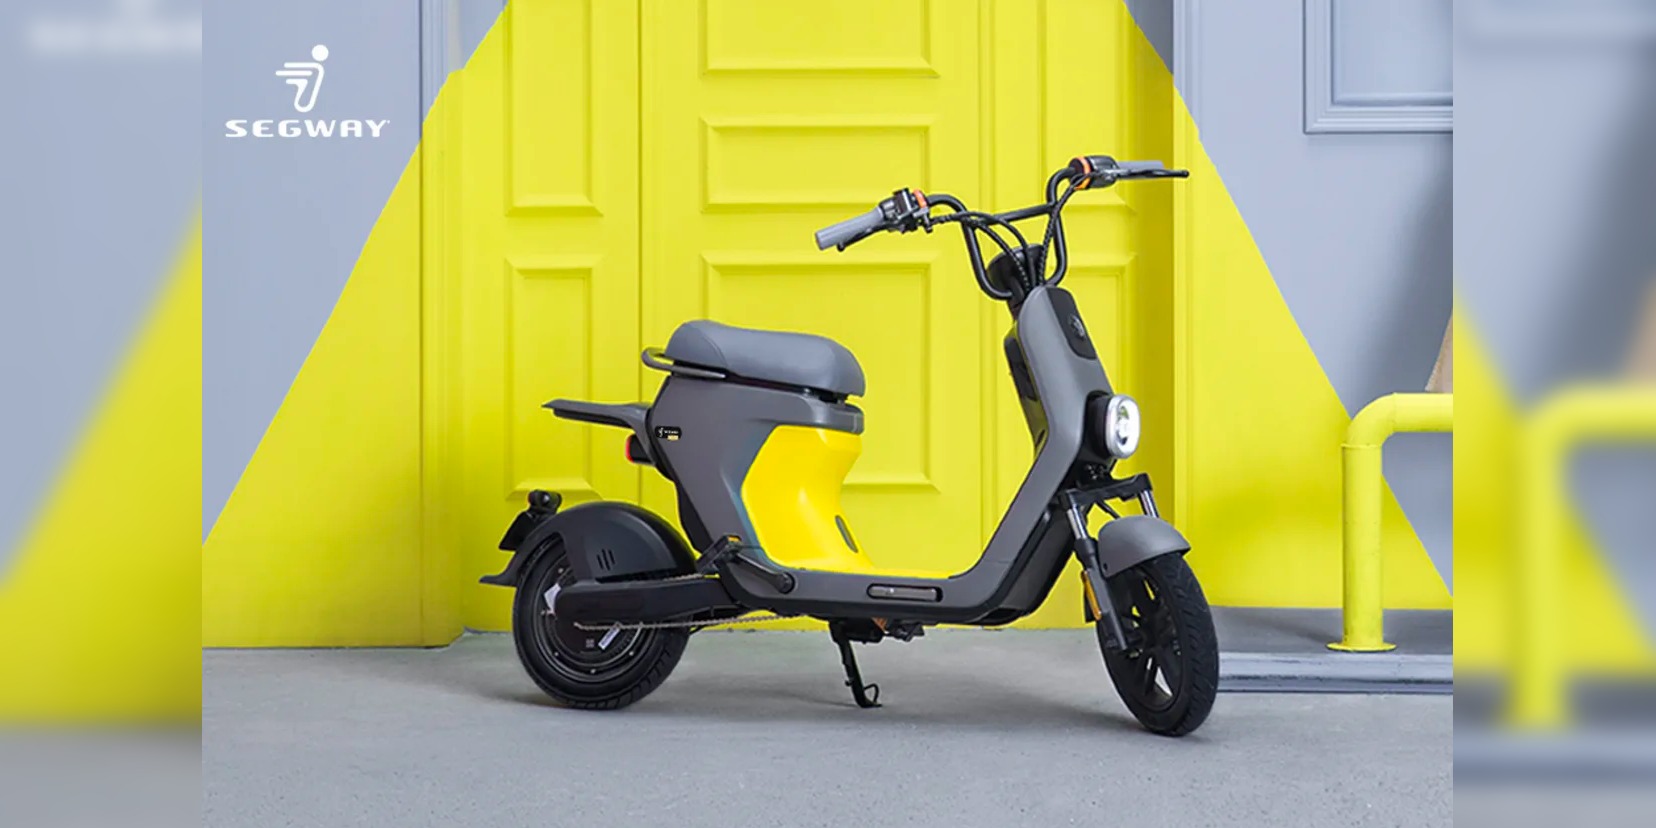 Electric scooter hire schemes